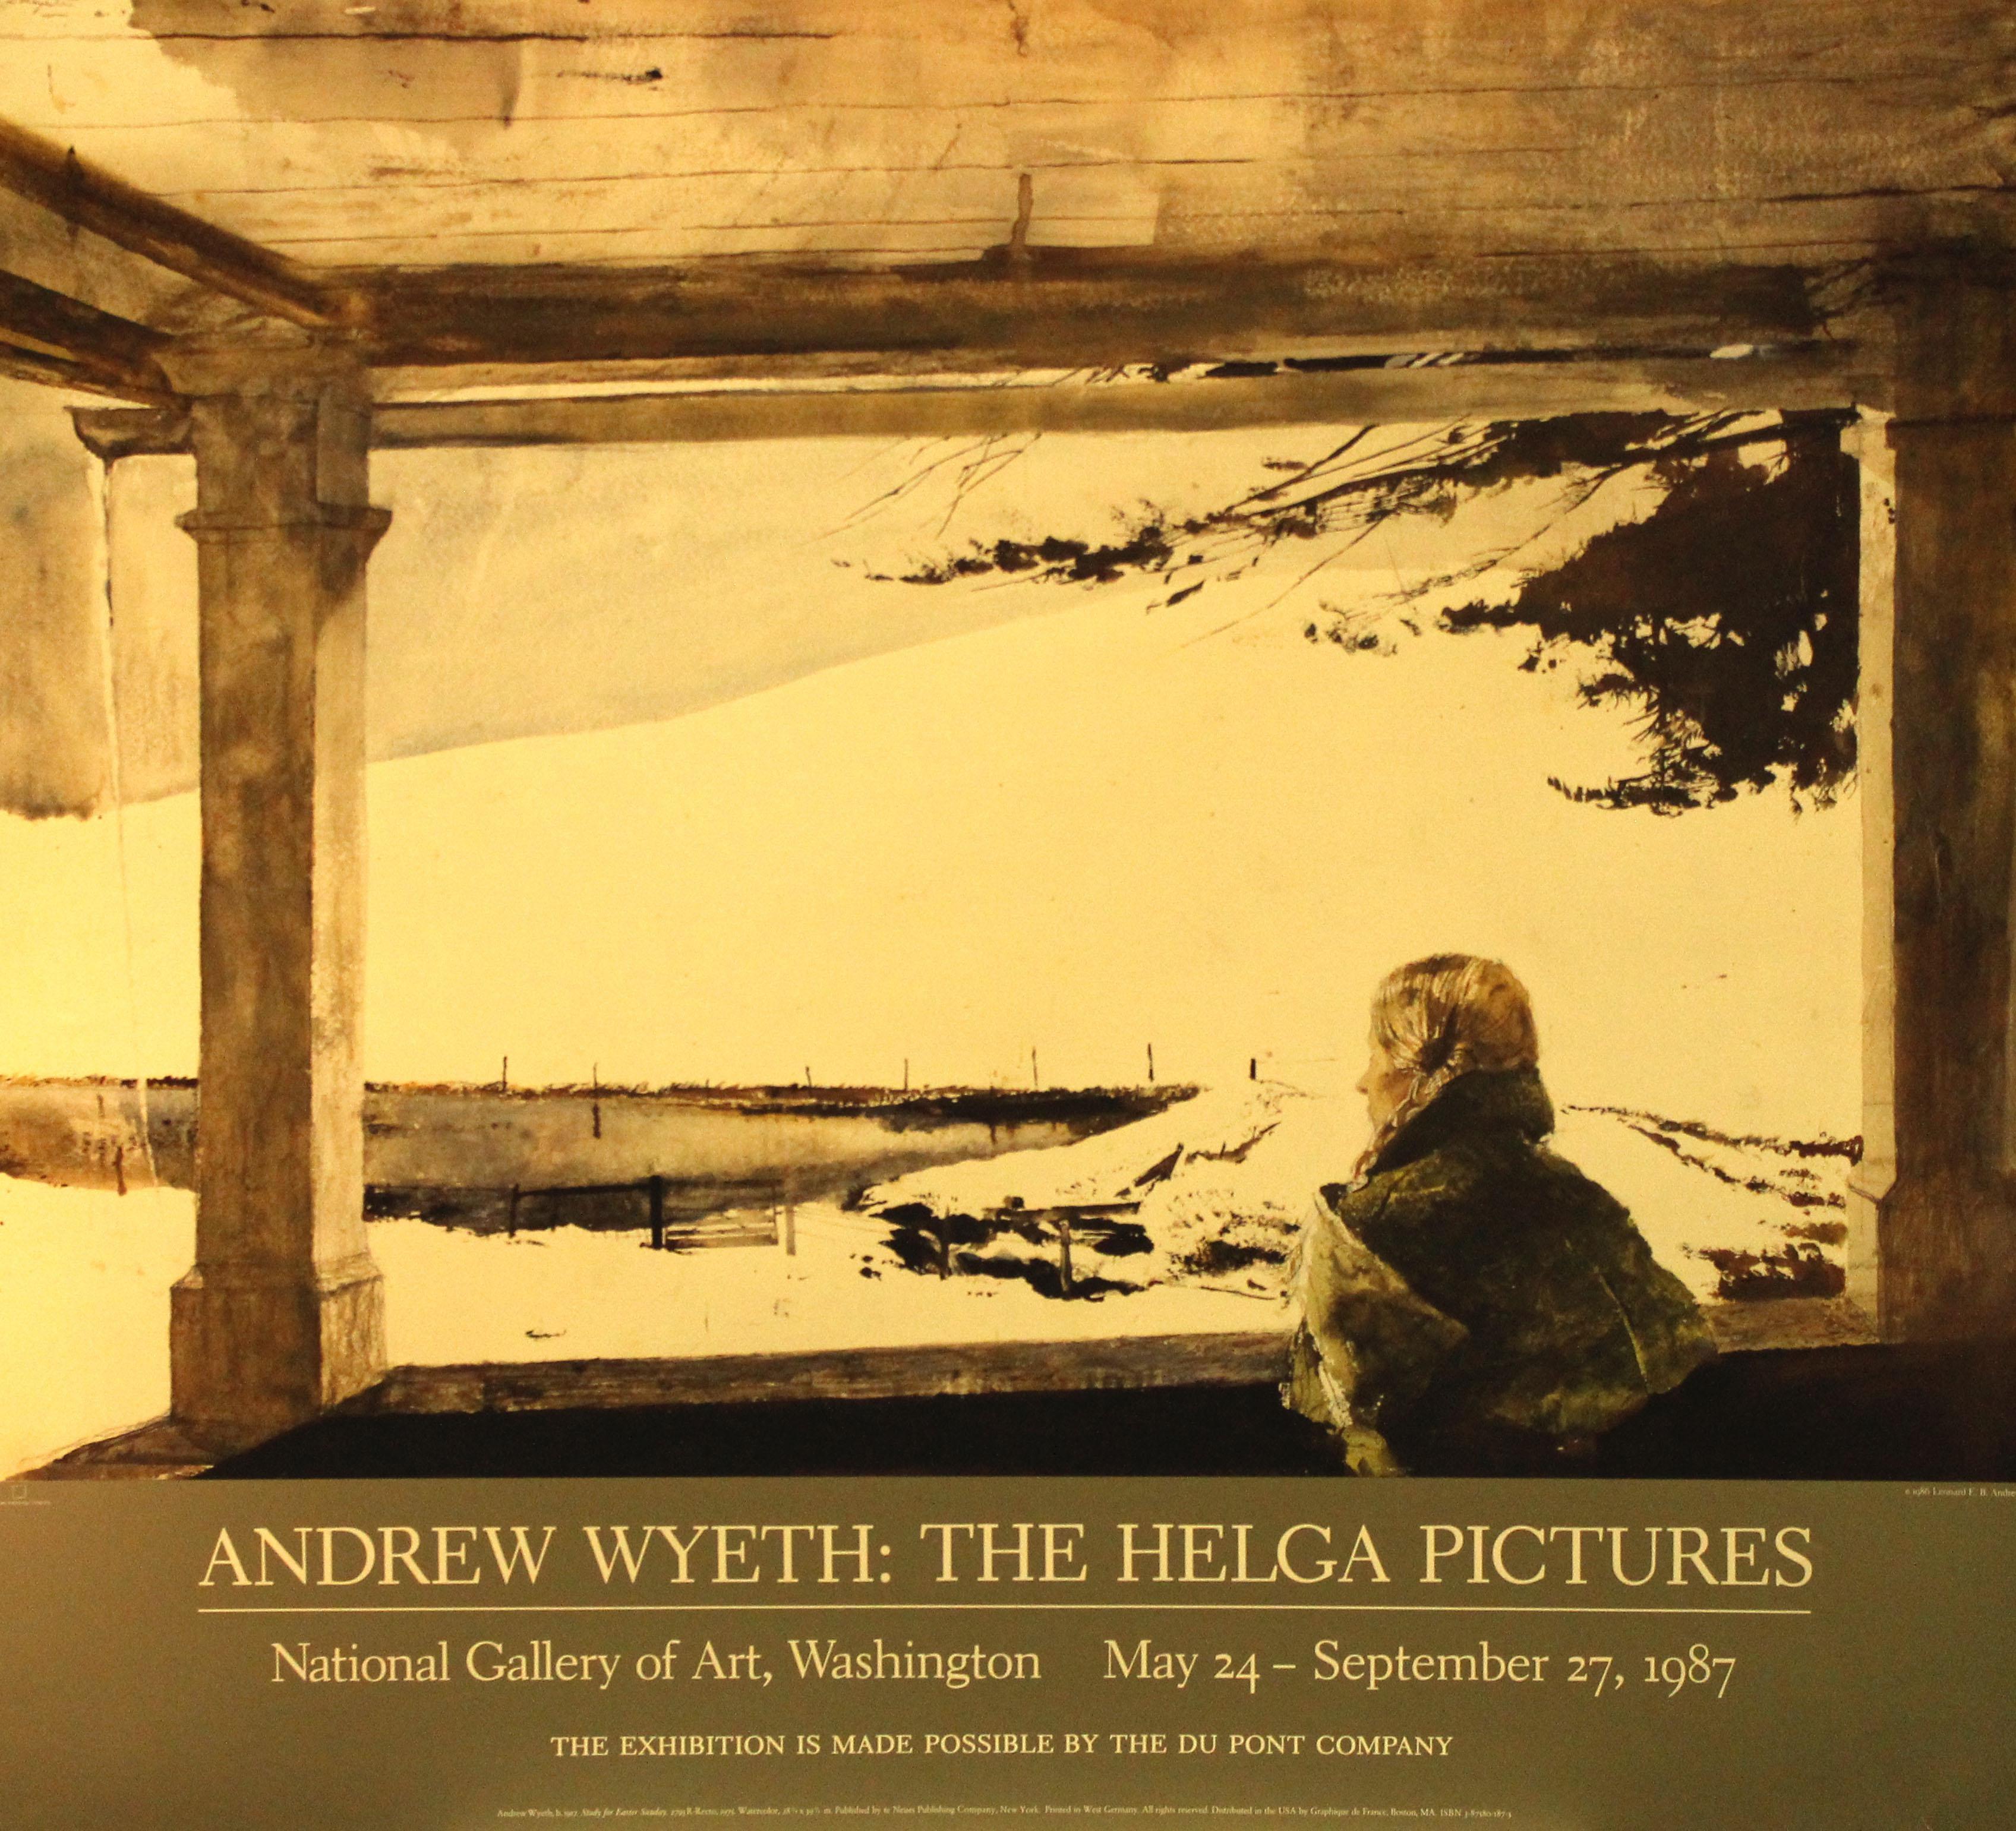 Andrew Wyeth Portrait Print - The Helga Pictures-National Gallery of Art, Washington, DC, May 24-September 27